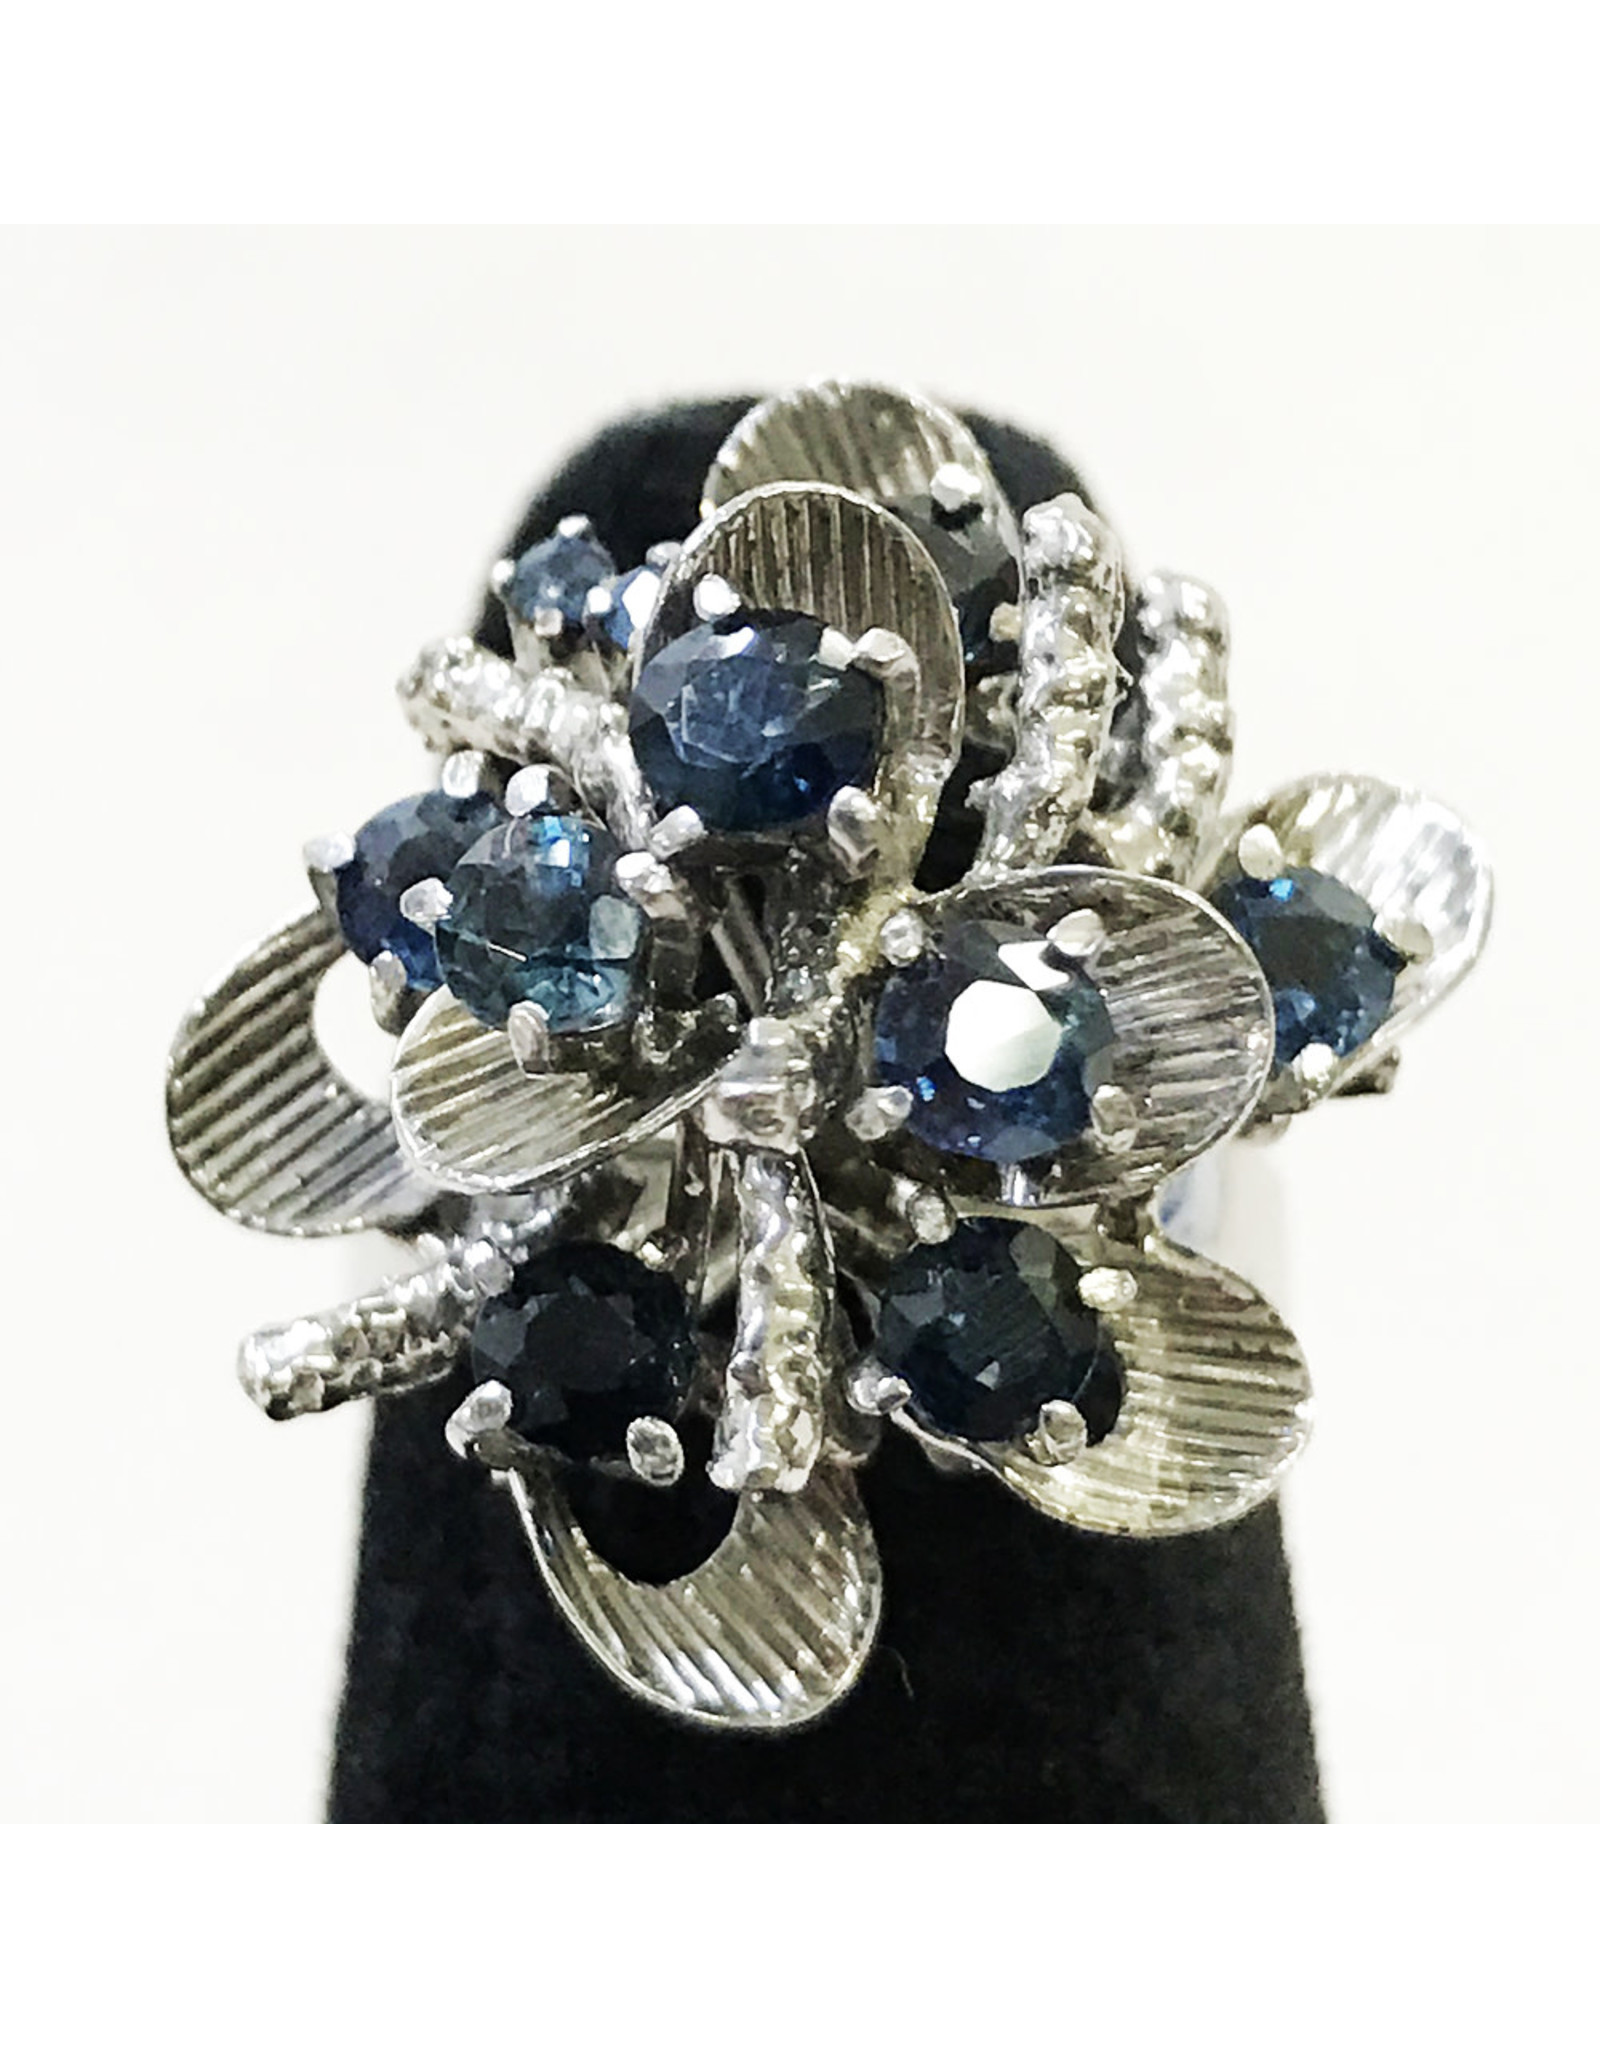 18K White Gold Floral Ring with Sapphires